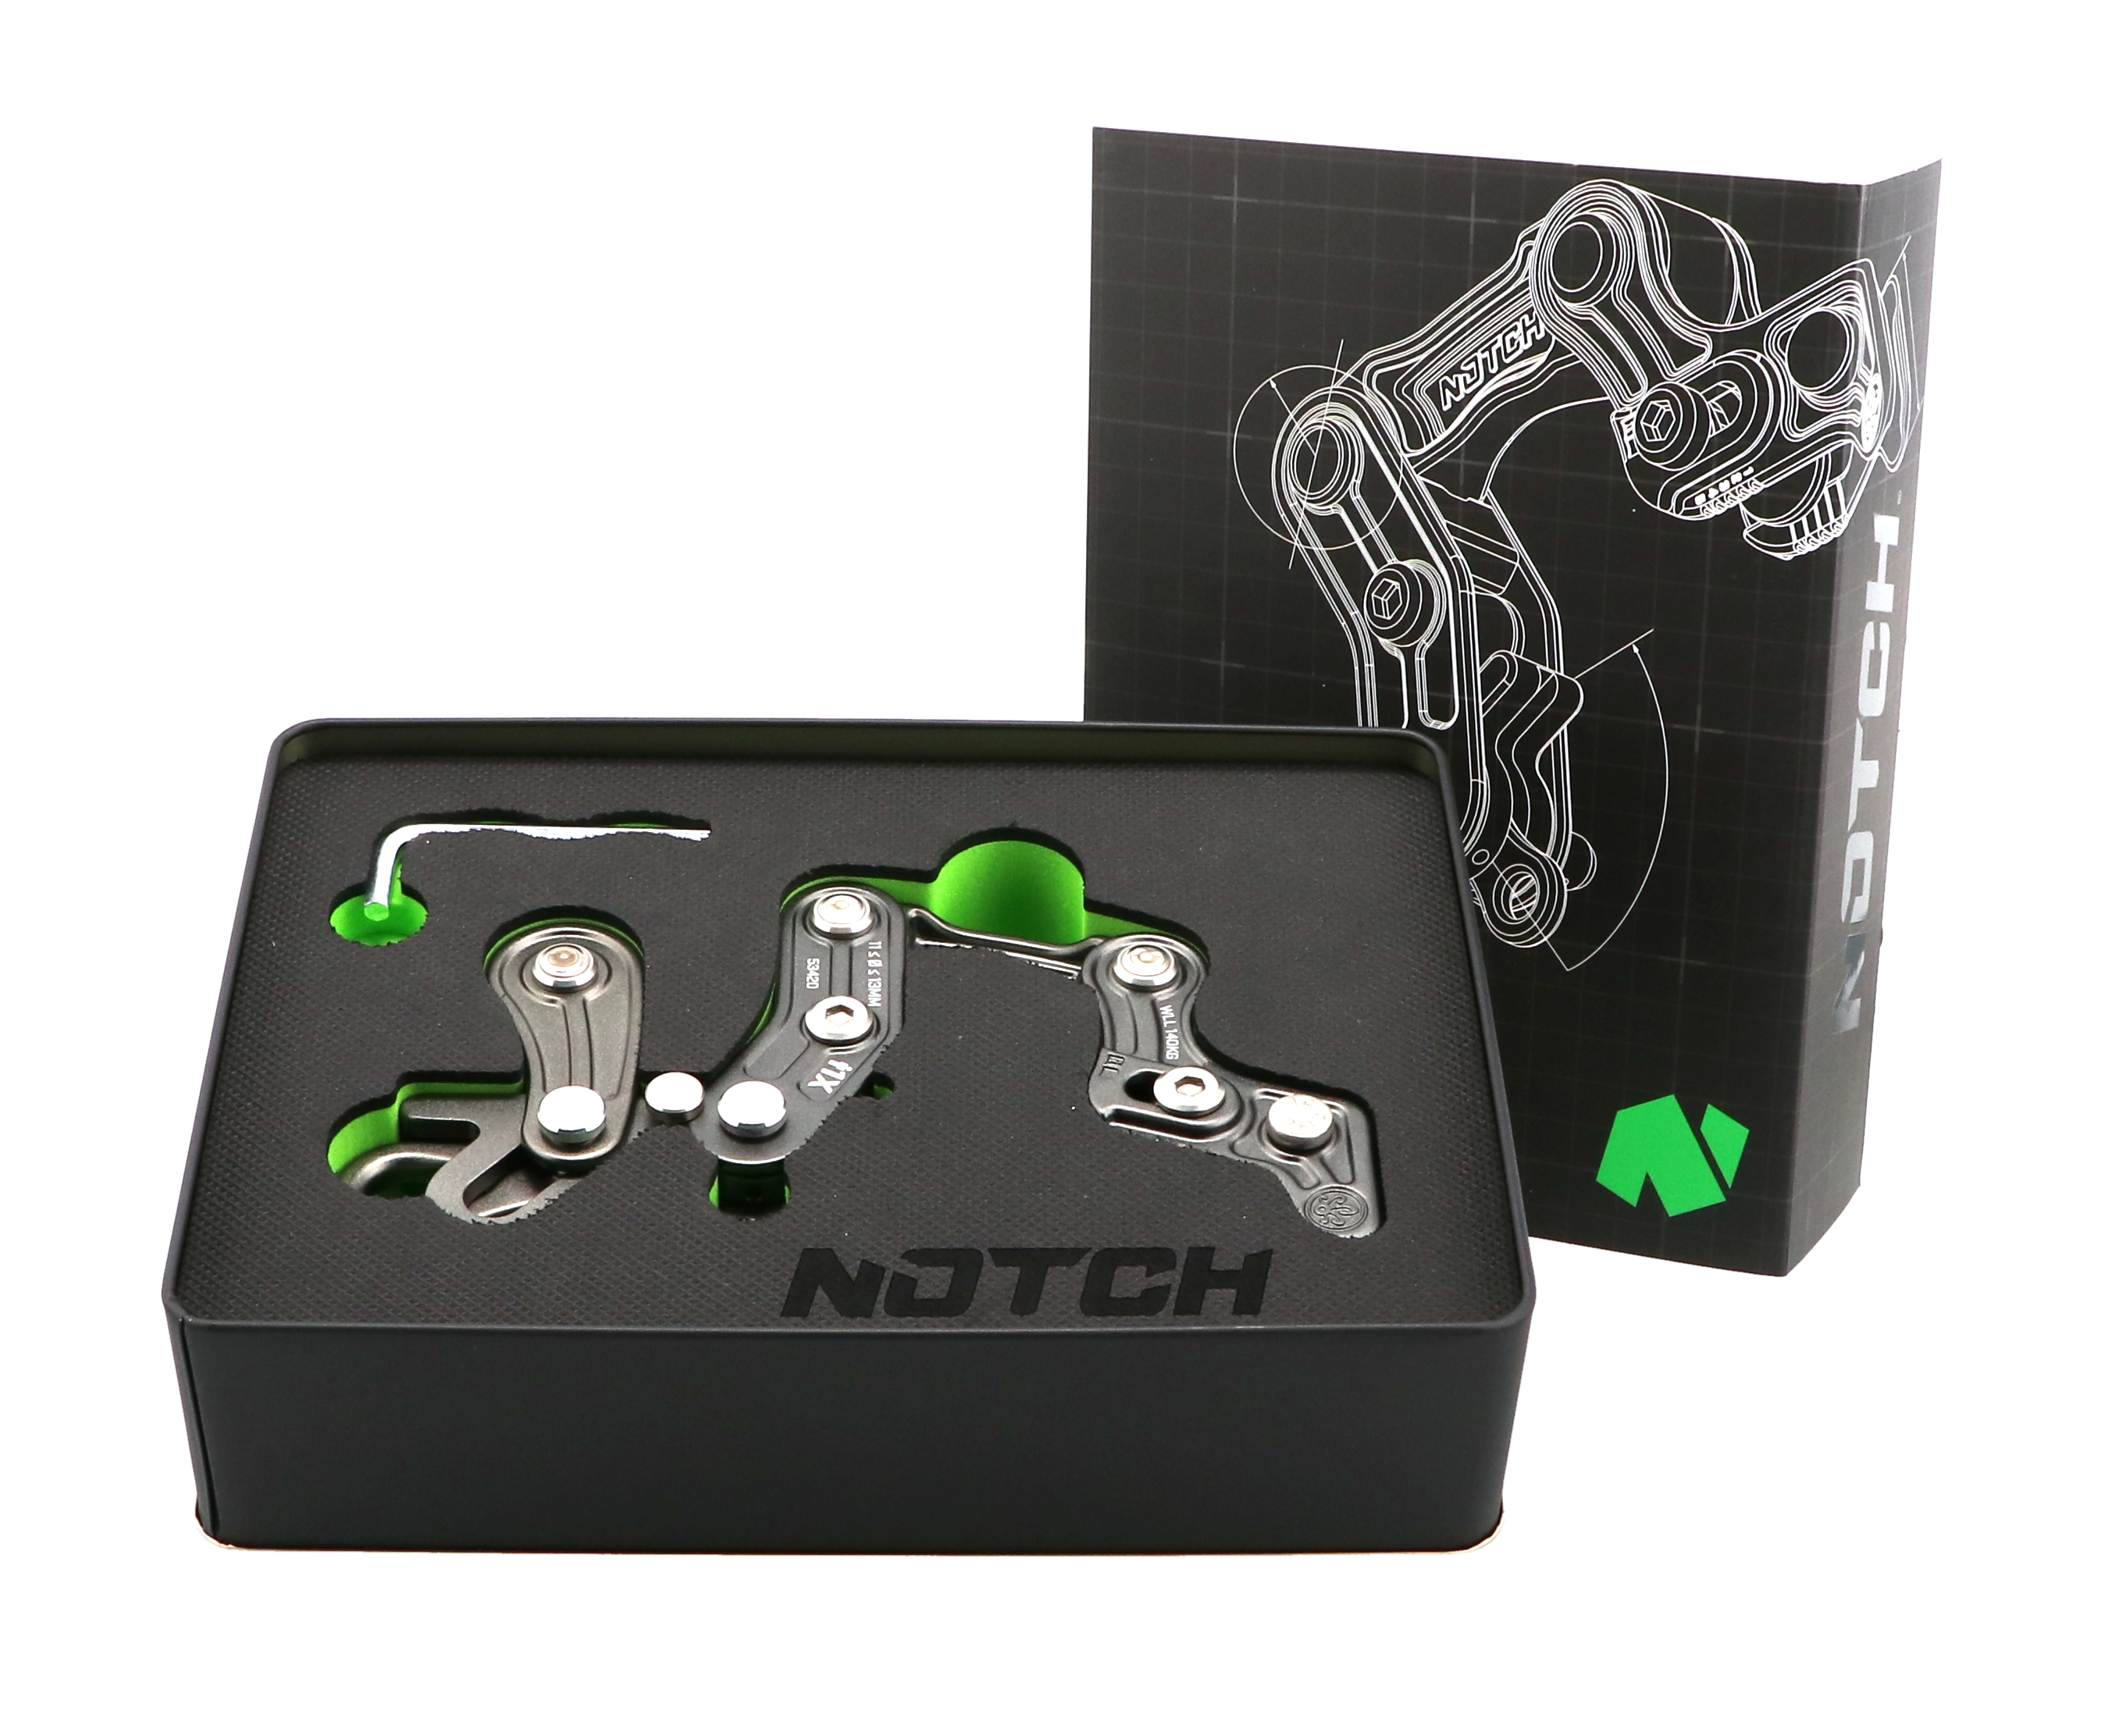 Notch Rope Runner Pro is here